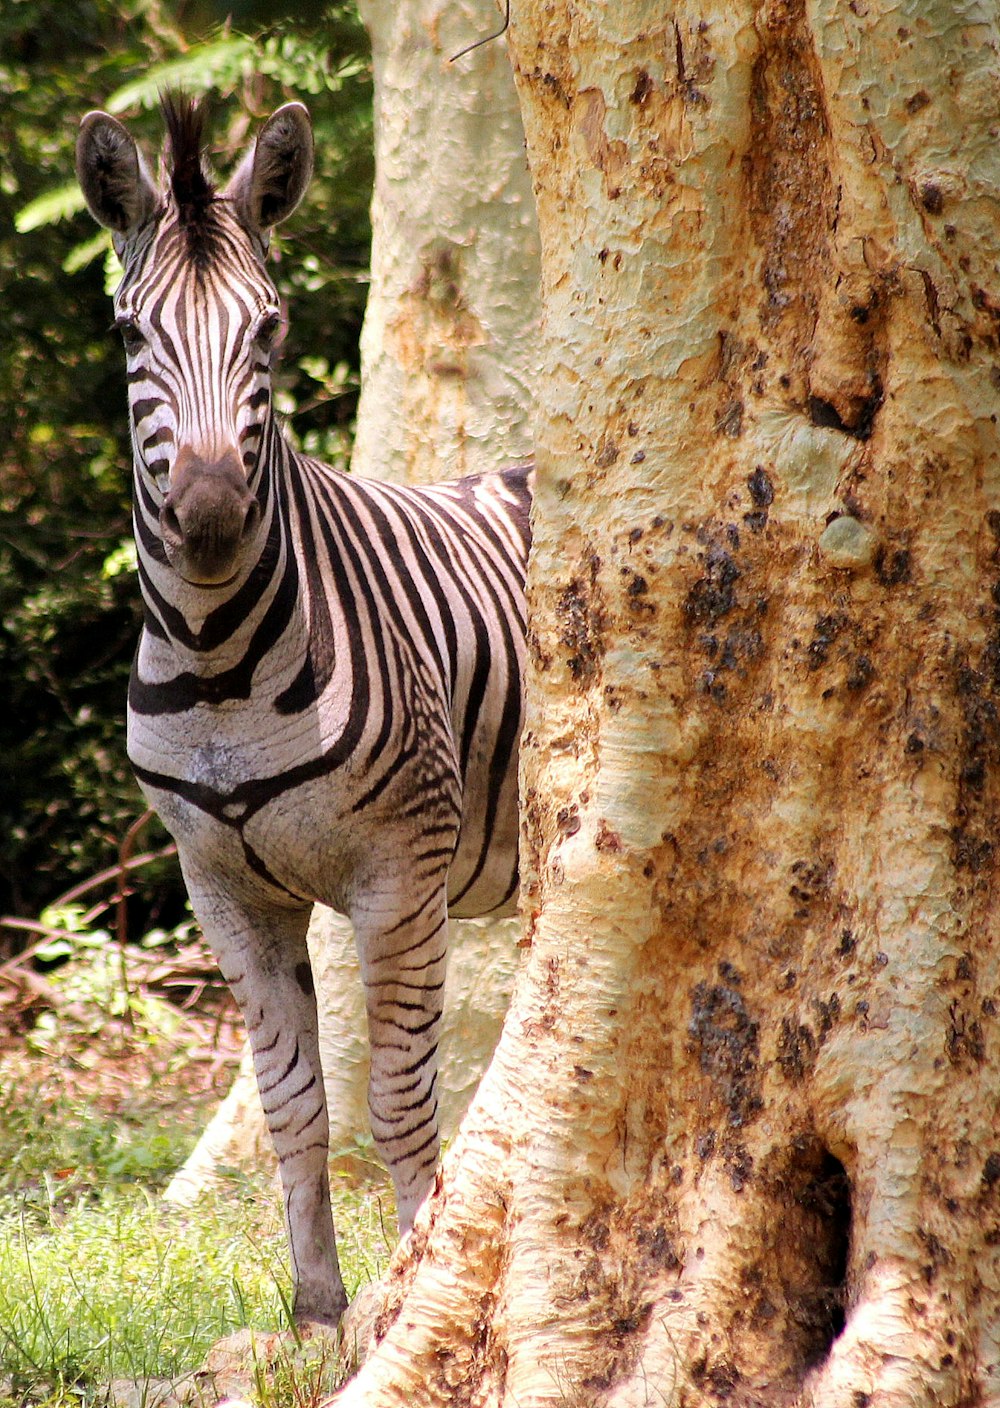 a zebra standing next to a tree in a forest